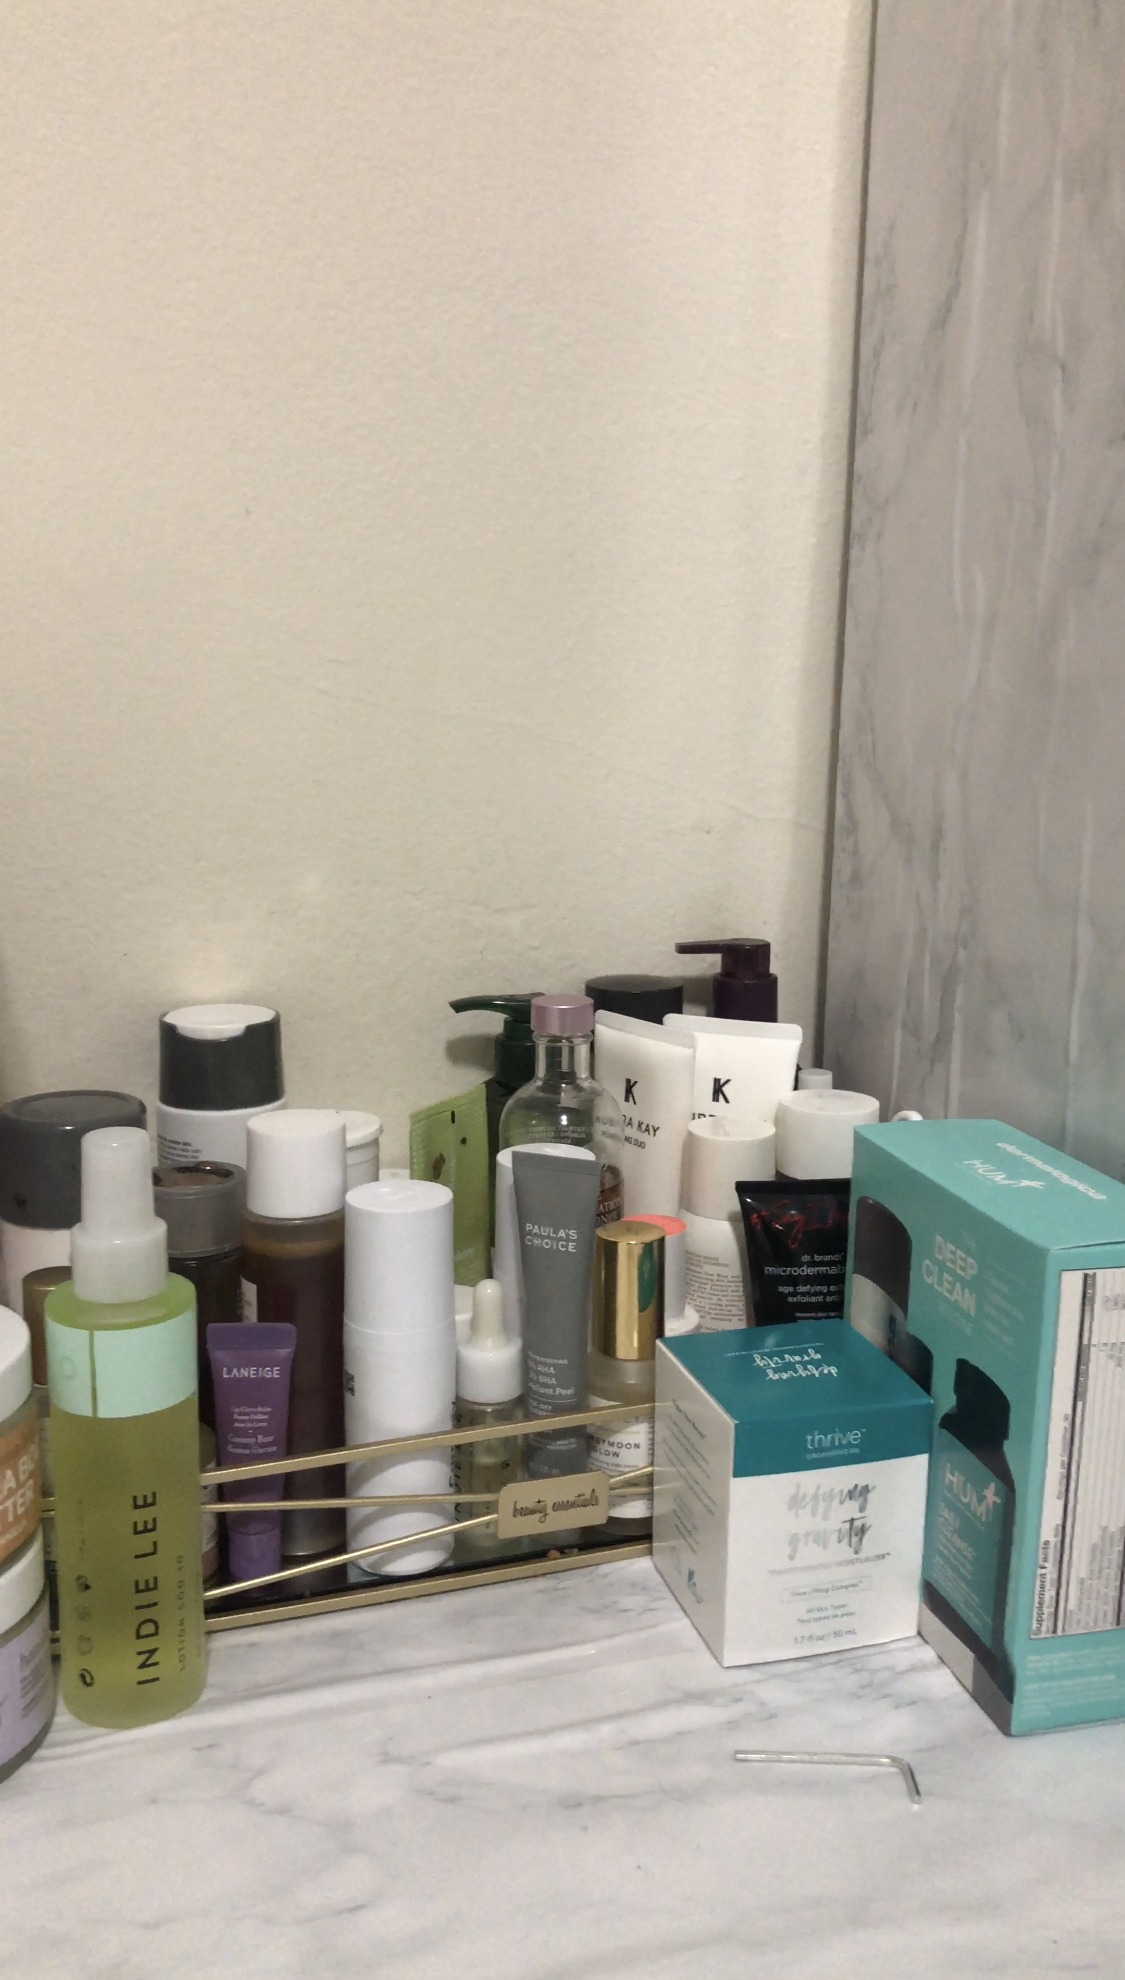 really taking my skincare organization up a notch here! #organizewithm, skincare organization